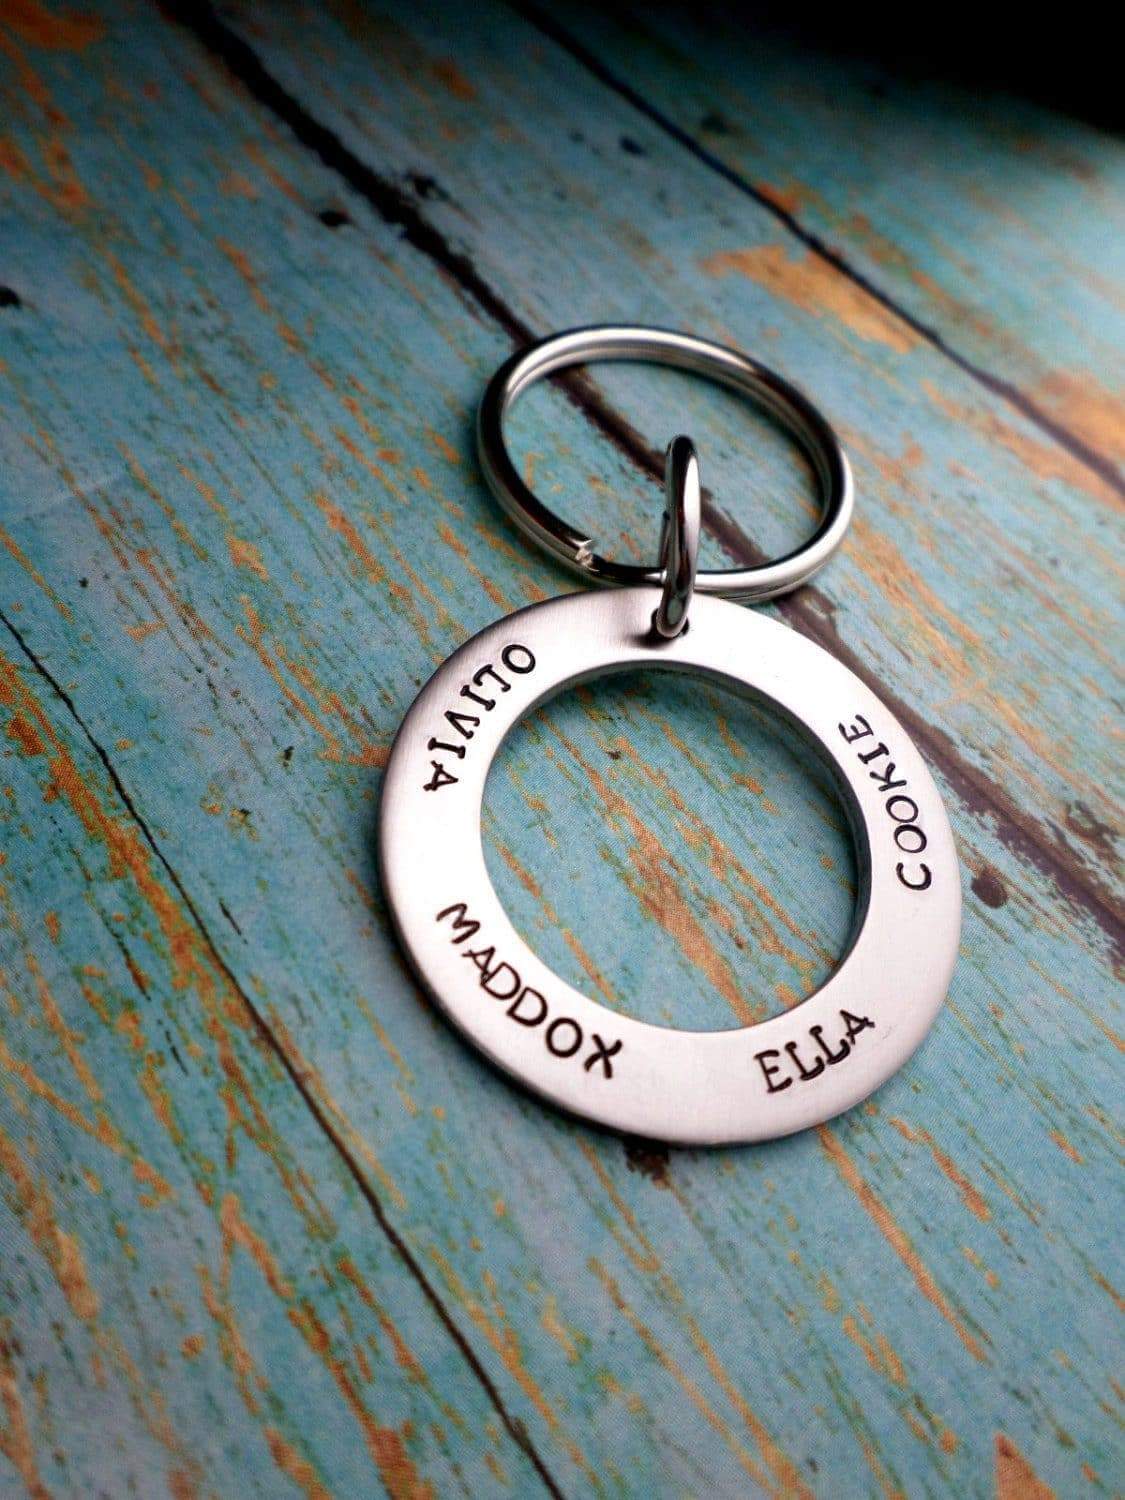 Father's Keychain, Childrens Names, Fathers Day Gift, Gift for Dad, Gift for Husband, Gift for him, Keychains, HandmadeLoveStories, HandmadeLoveStories , [Handmade_Love_Stories], [Hand_Stamped_Jewelry], [Etsy_Stamped_Jewelry], [Etsy_Jewelry]